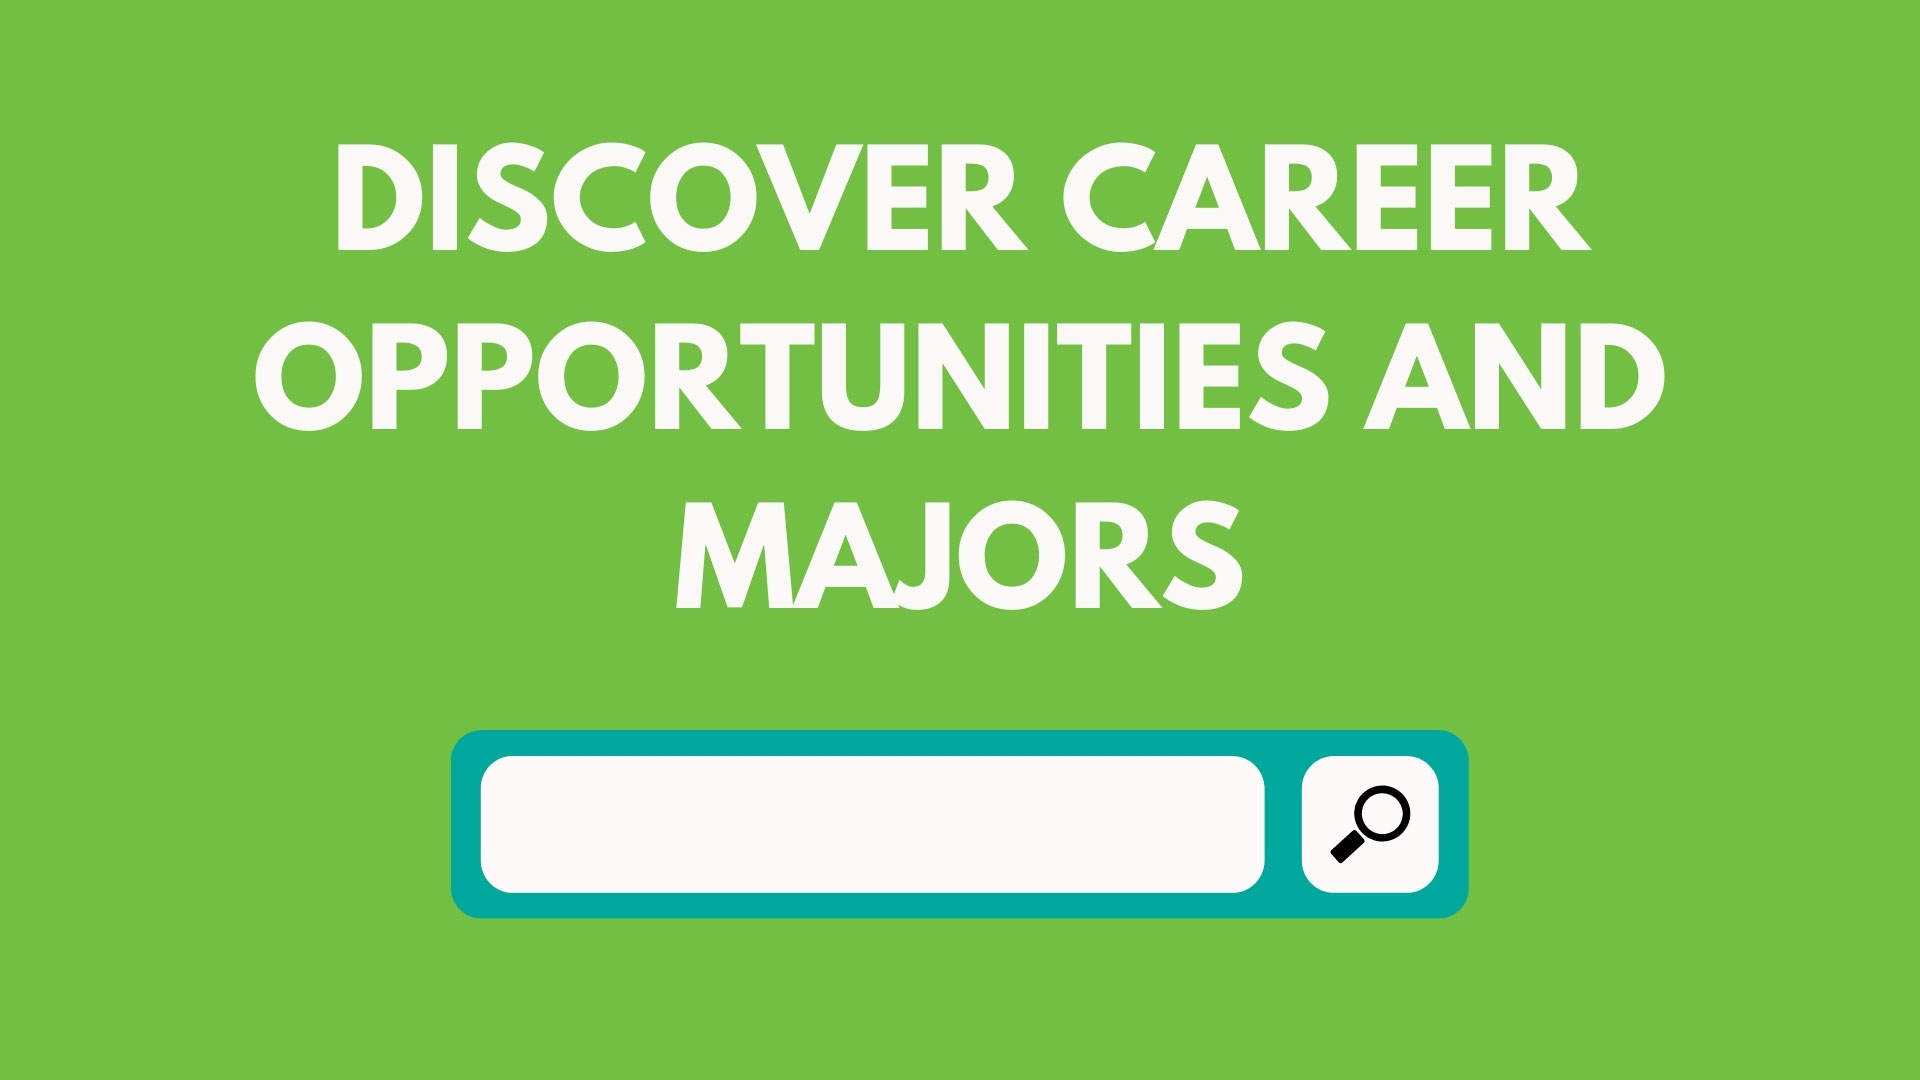 Explore career opportunities and majors